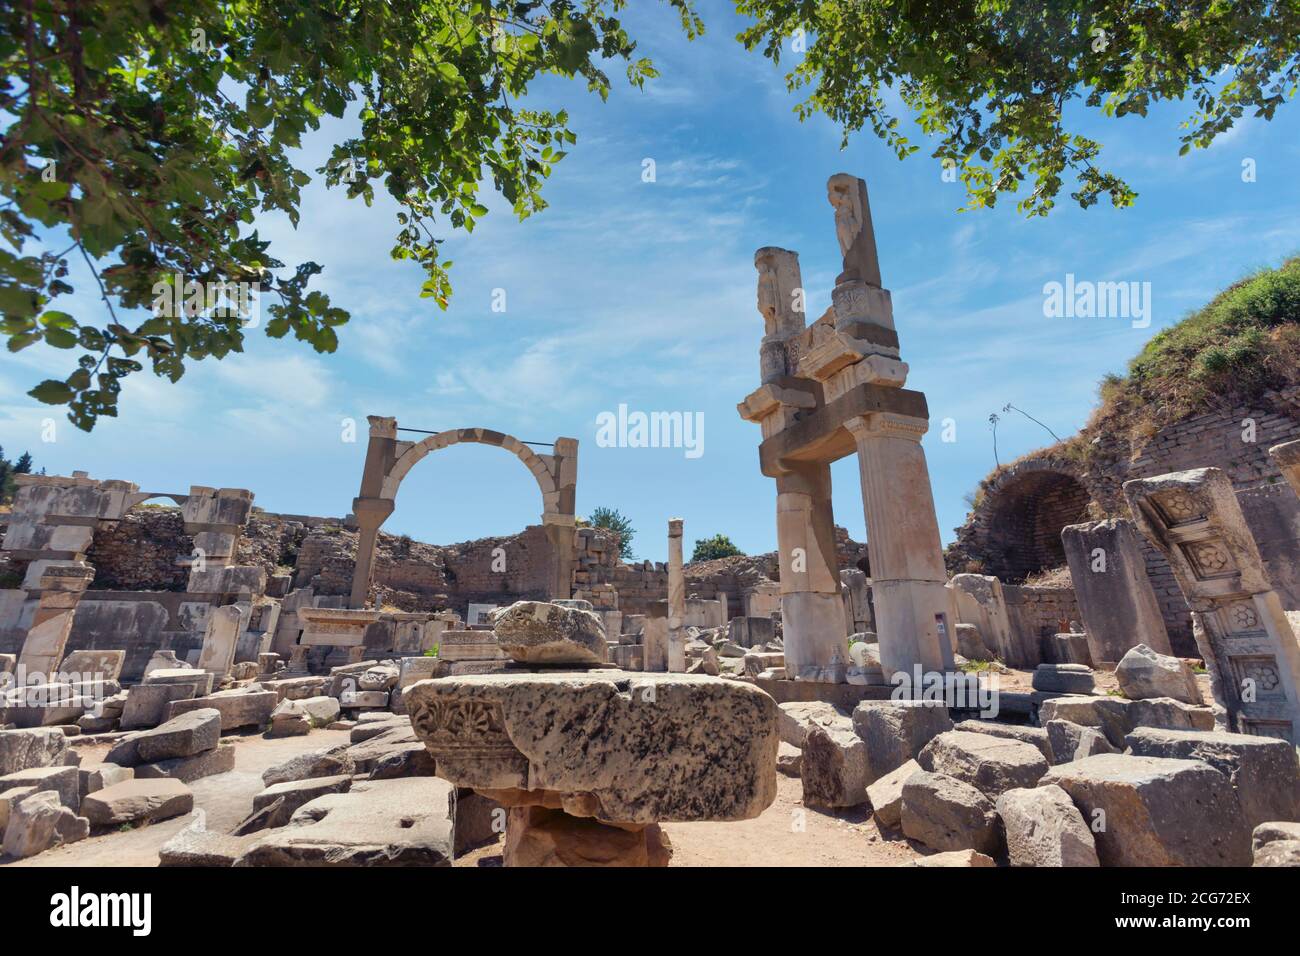 Ephesus, near Selcuk, Izmir Province, Turkey.  Temple of Domitian with the arch of the Fountain of Domitian in background. Stock Photo